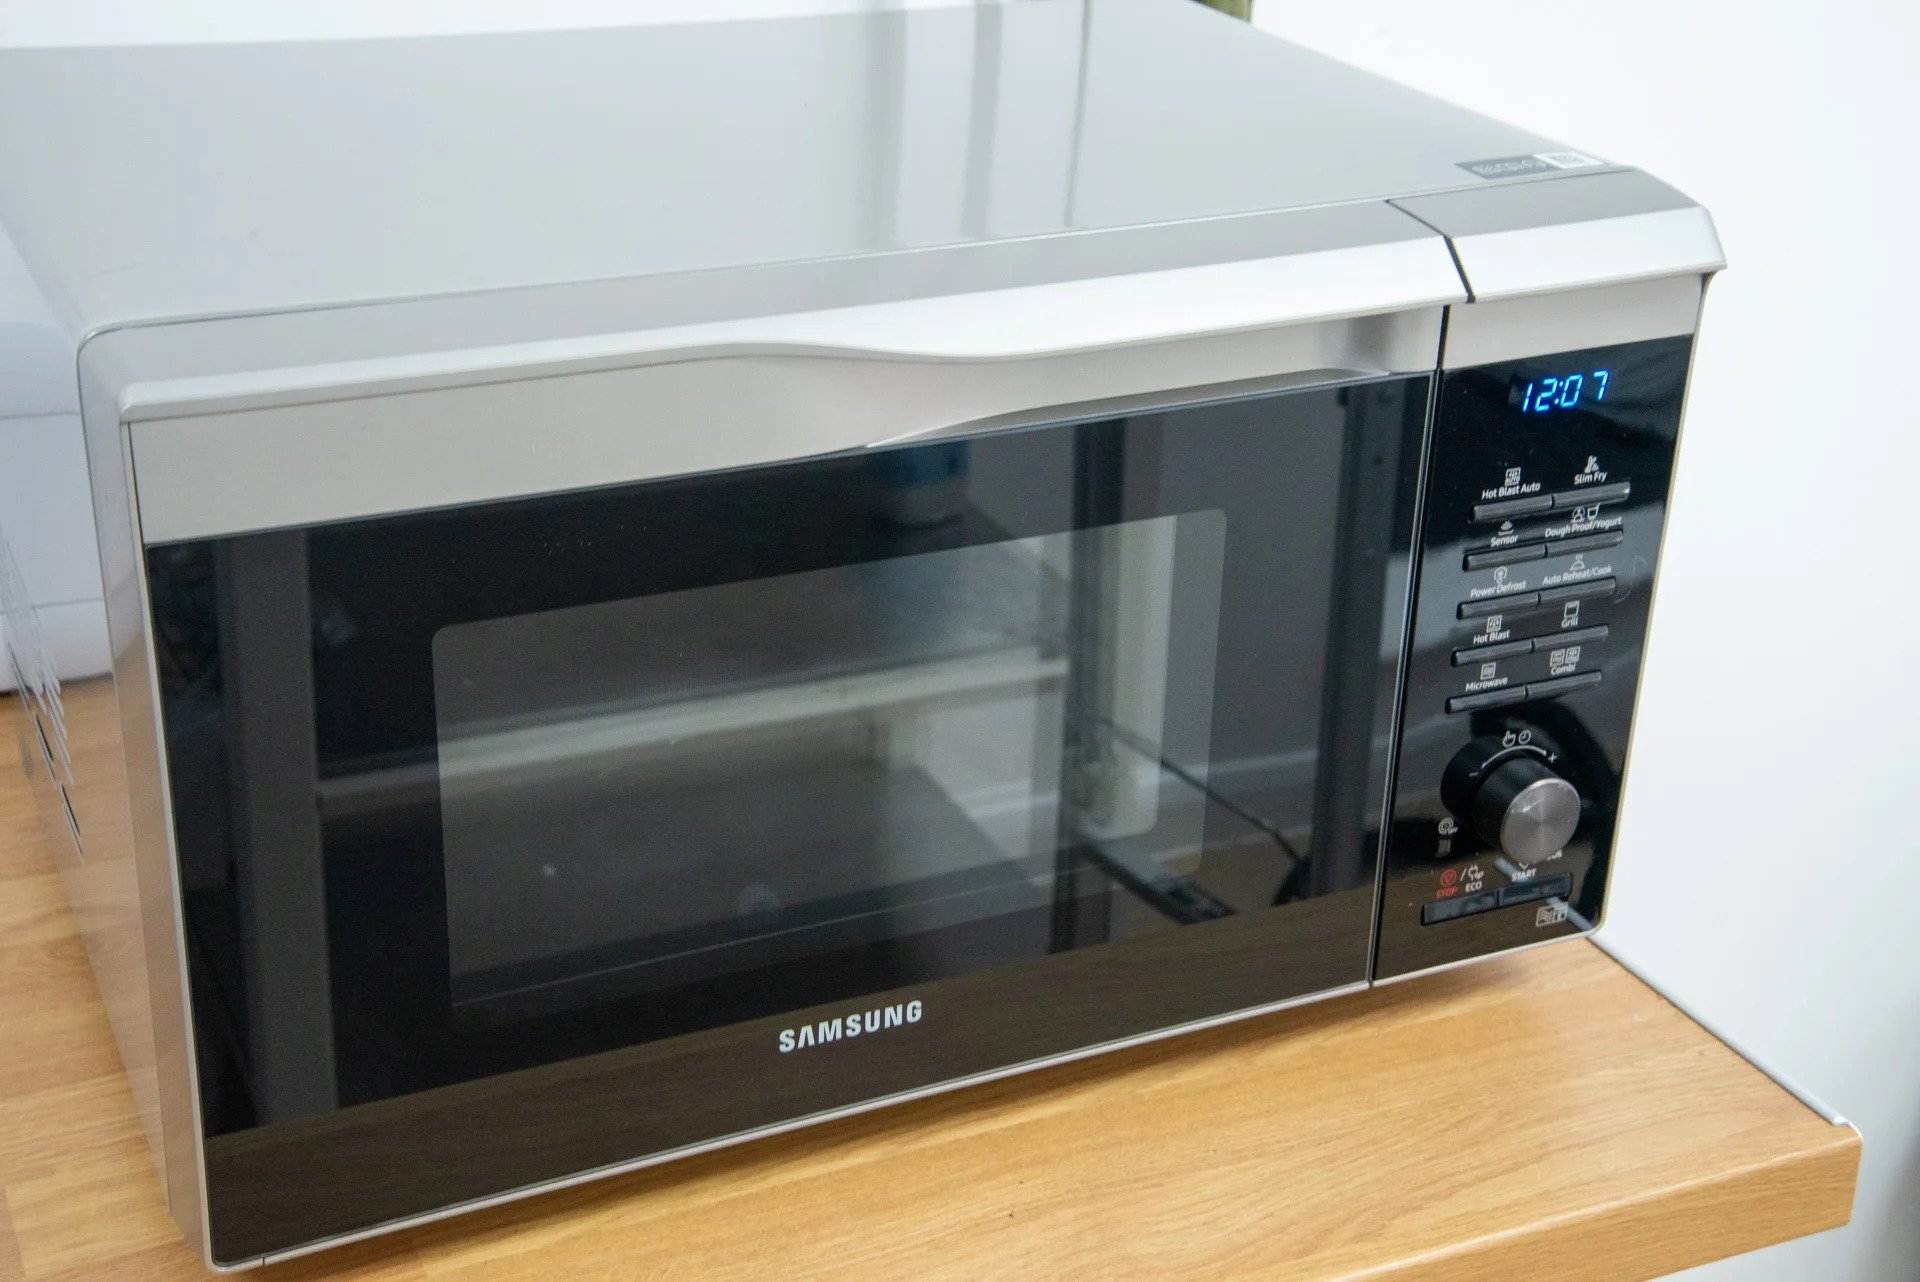 How To Fix The Error Code E-57 For Samsung Convection Oven